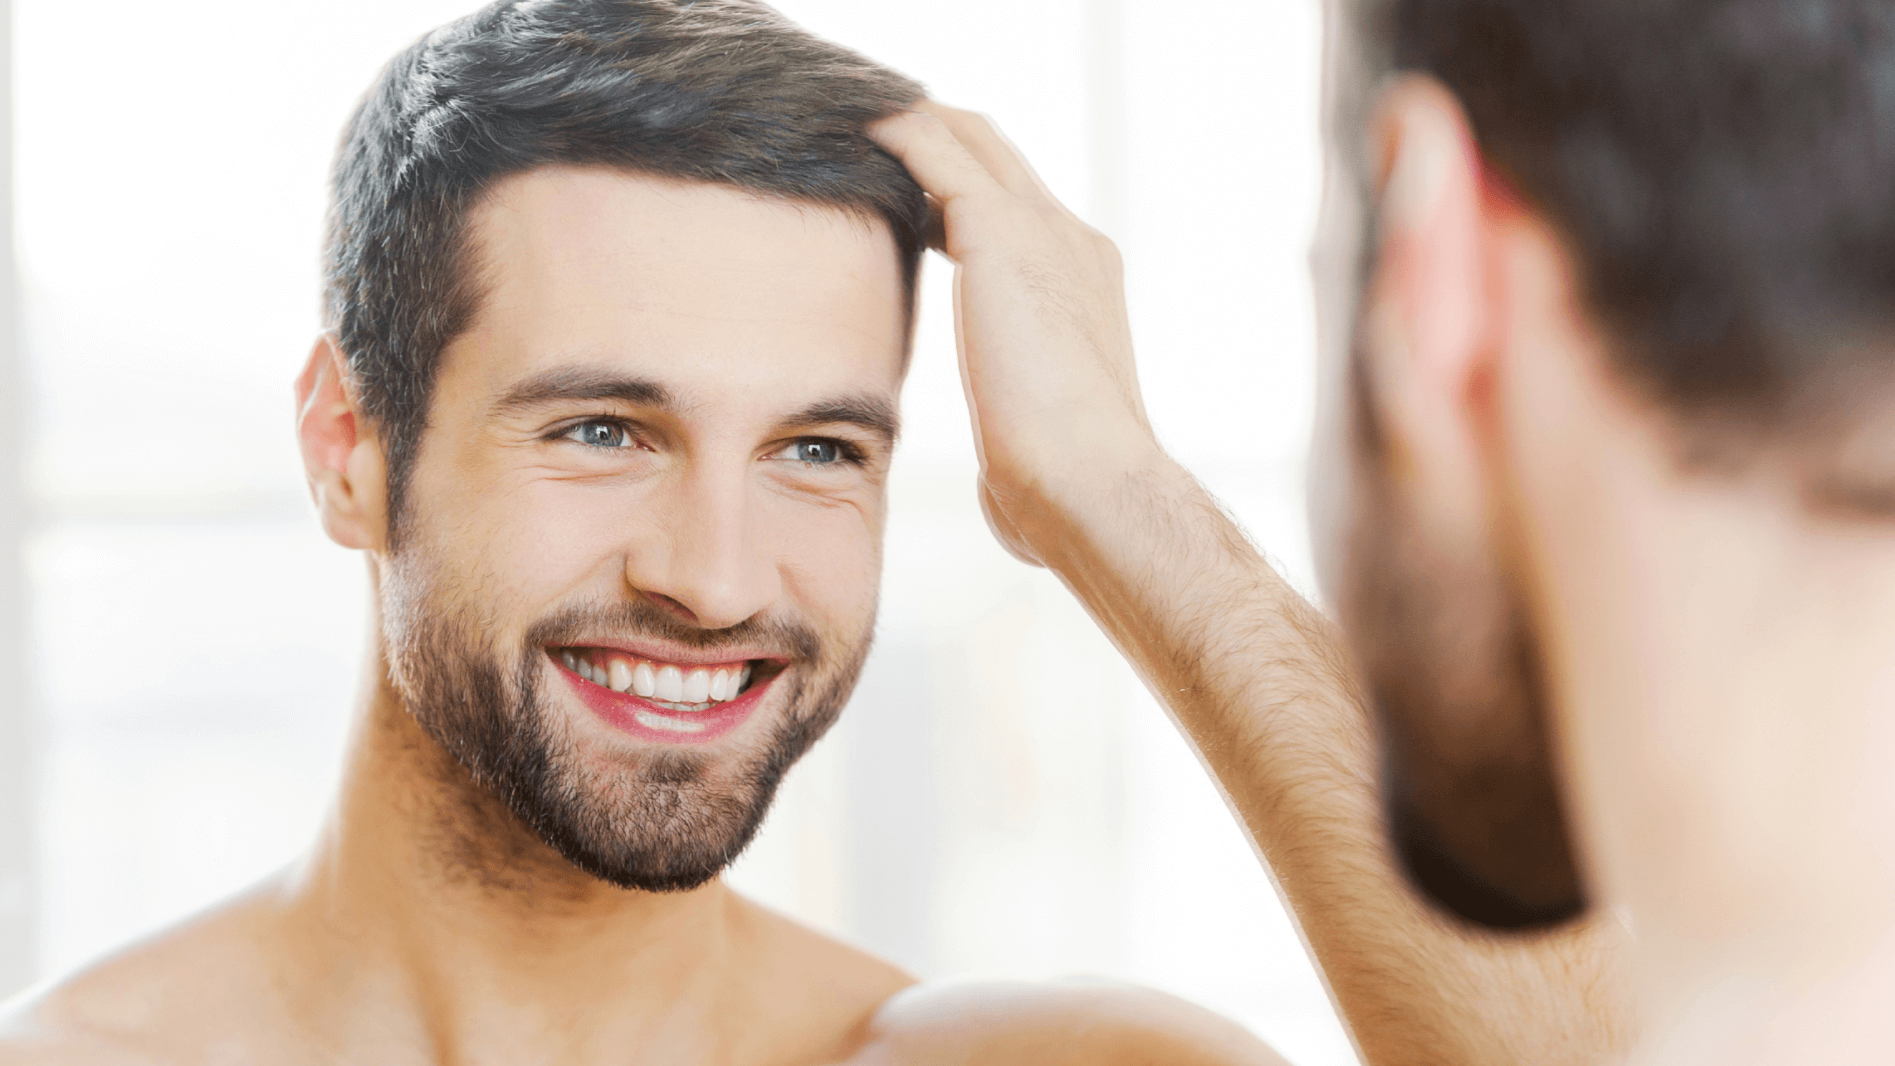 Will I Have Scabs After A NeoGraft® Hair Transplant?